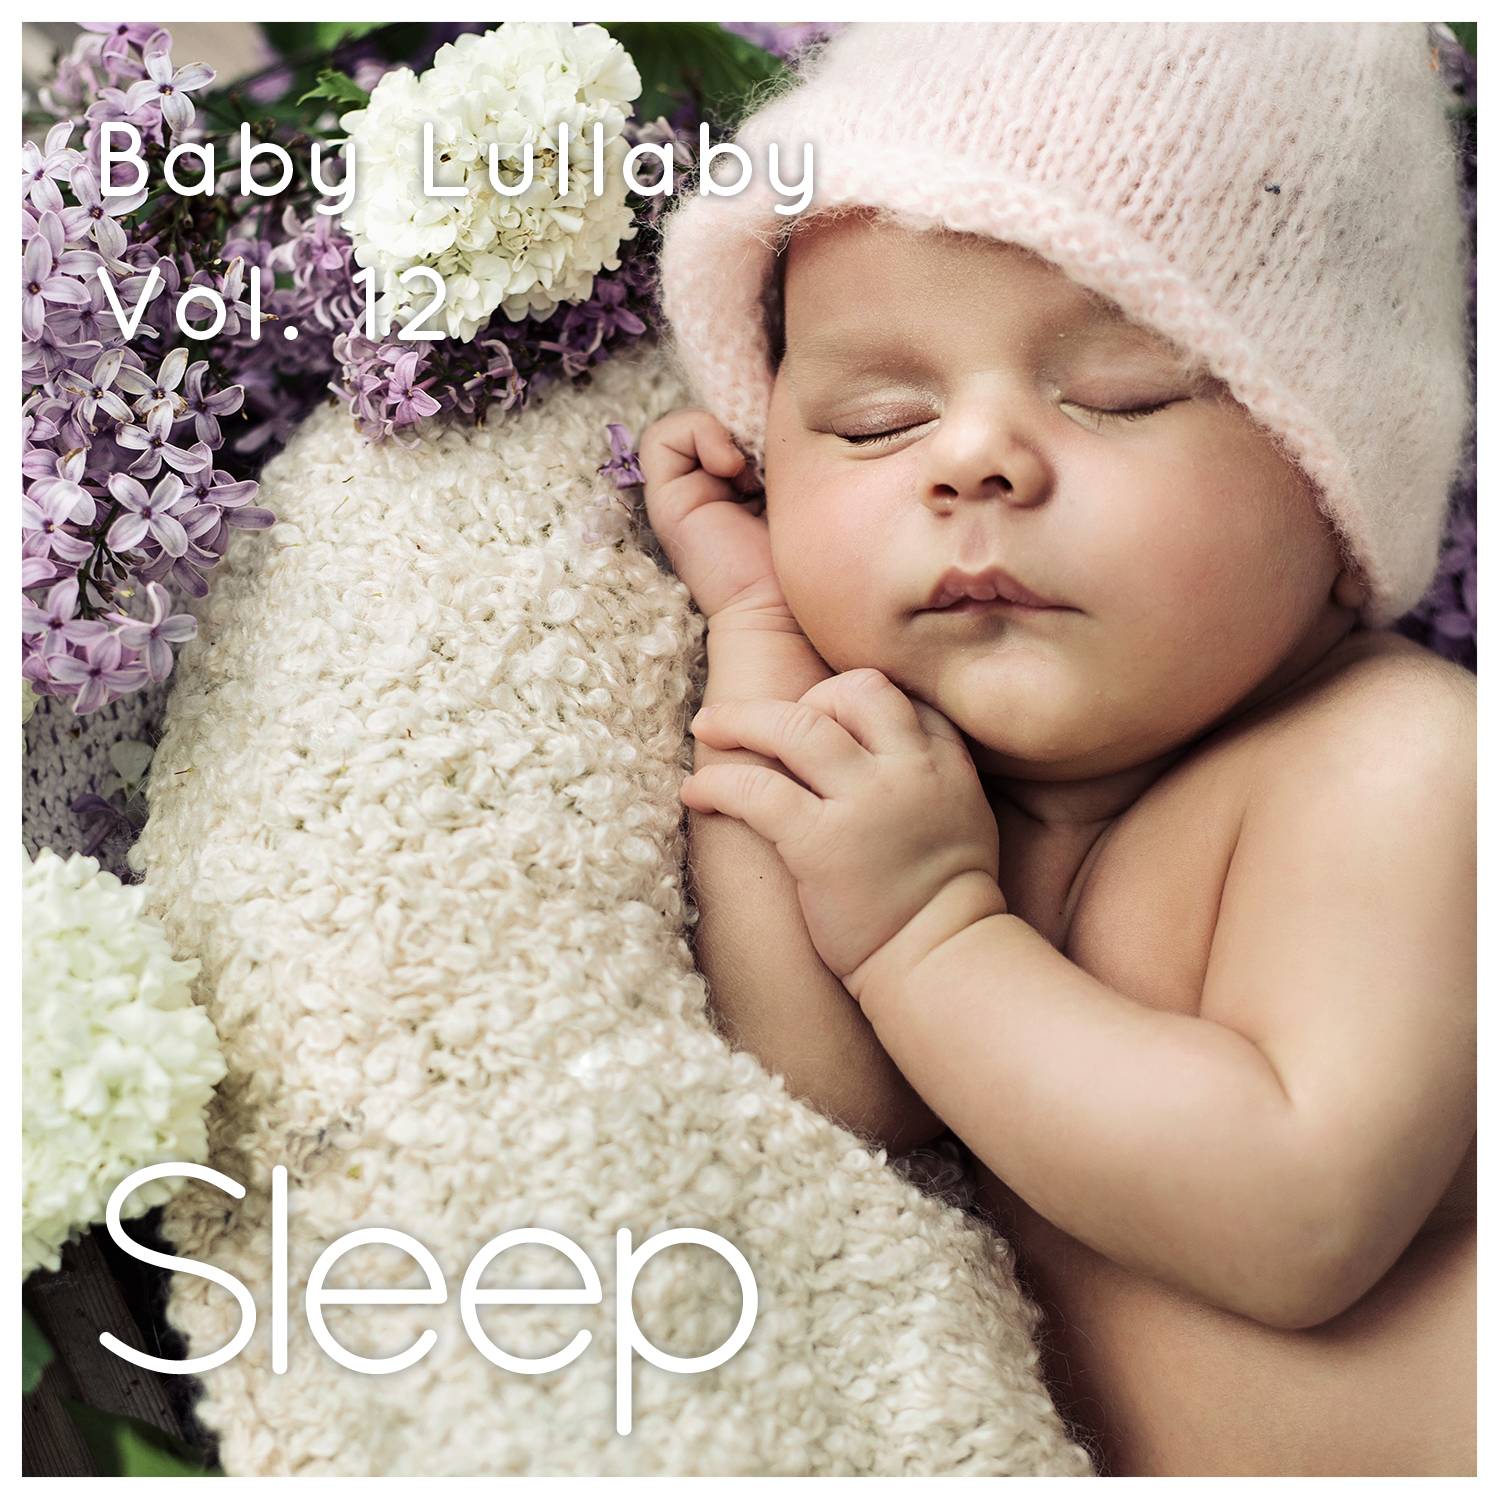 Baby Sleep Ambient Lullaby, Pt. 57